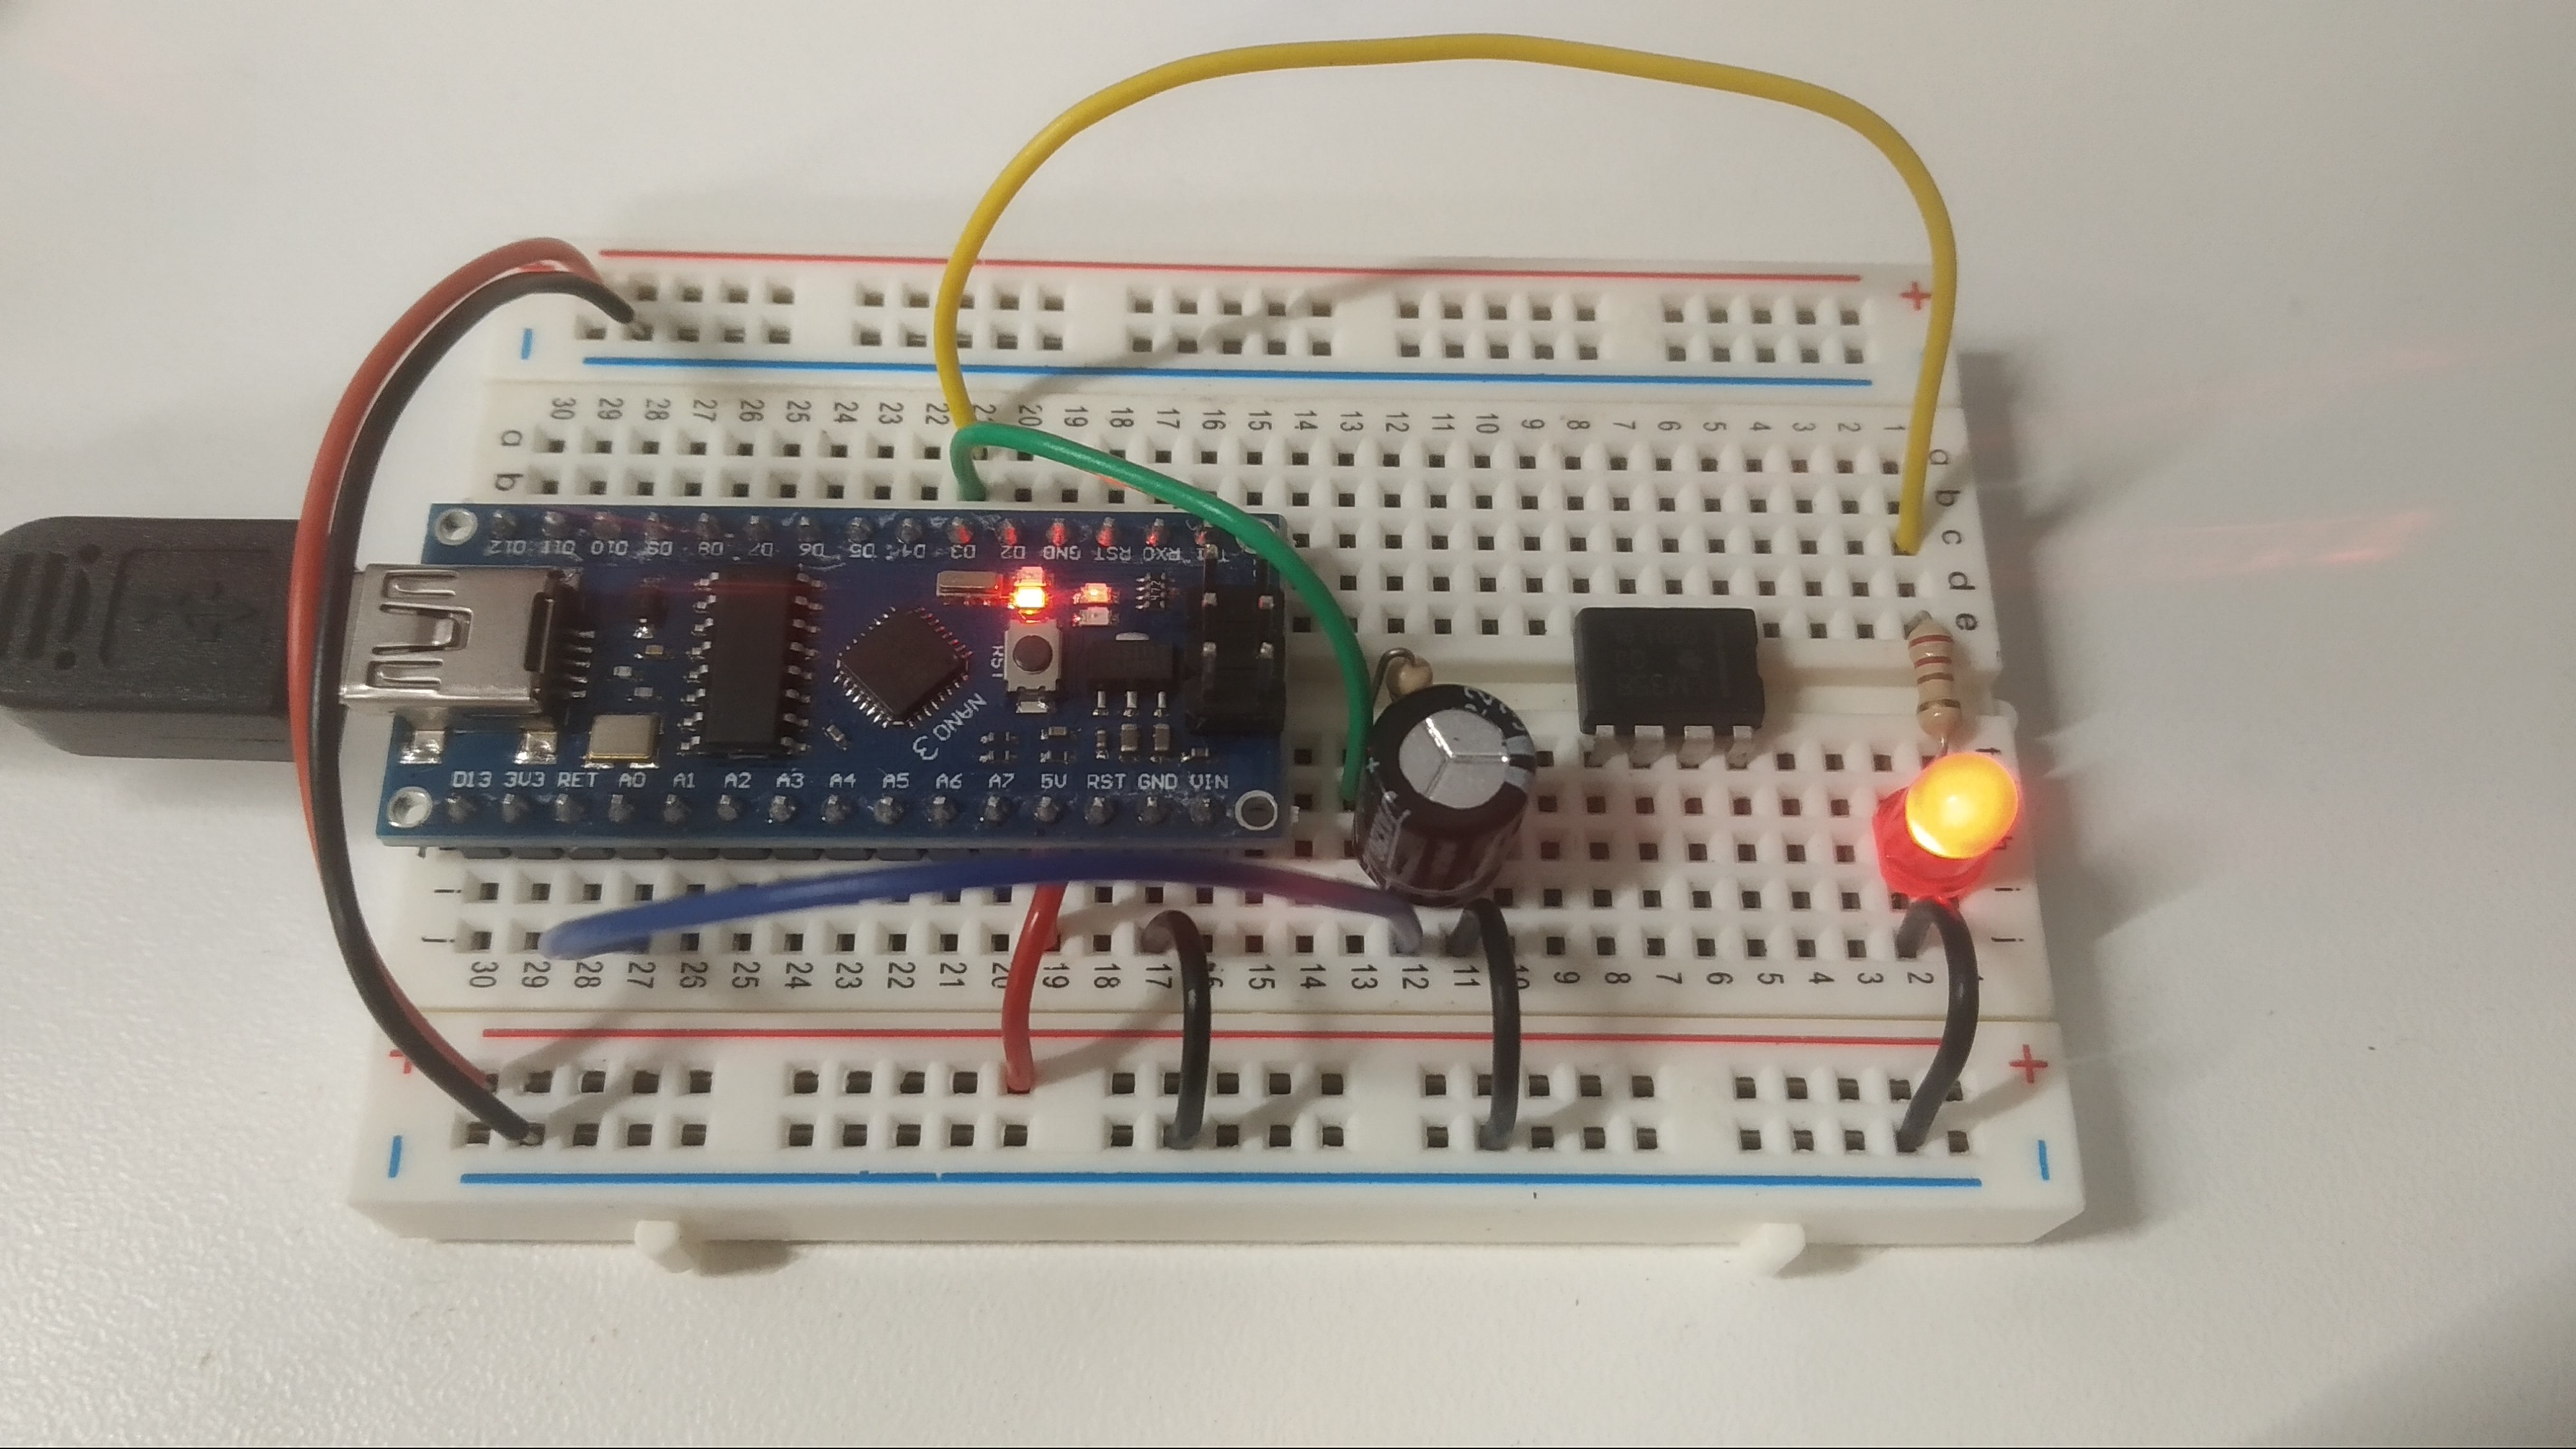 Breadboard circuit with Arduino generating a square wave output that drives an RC network.